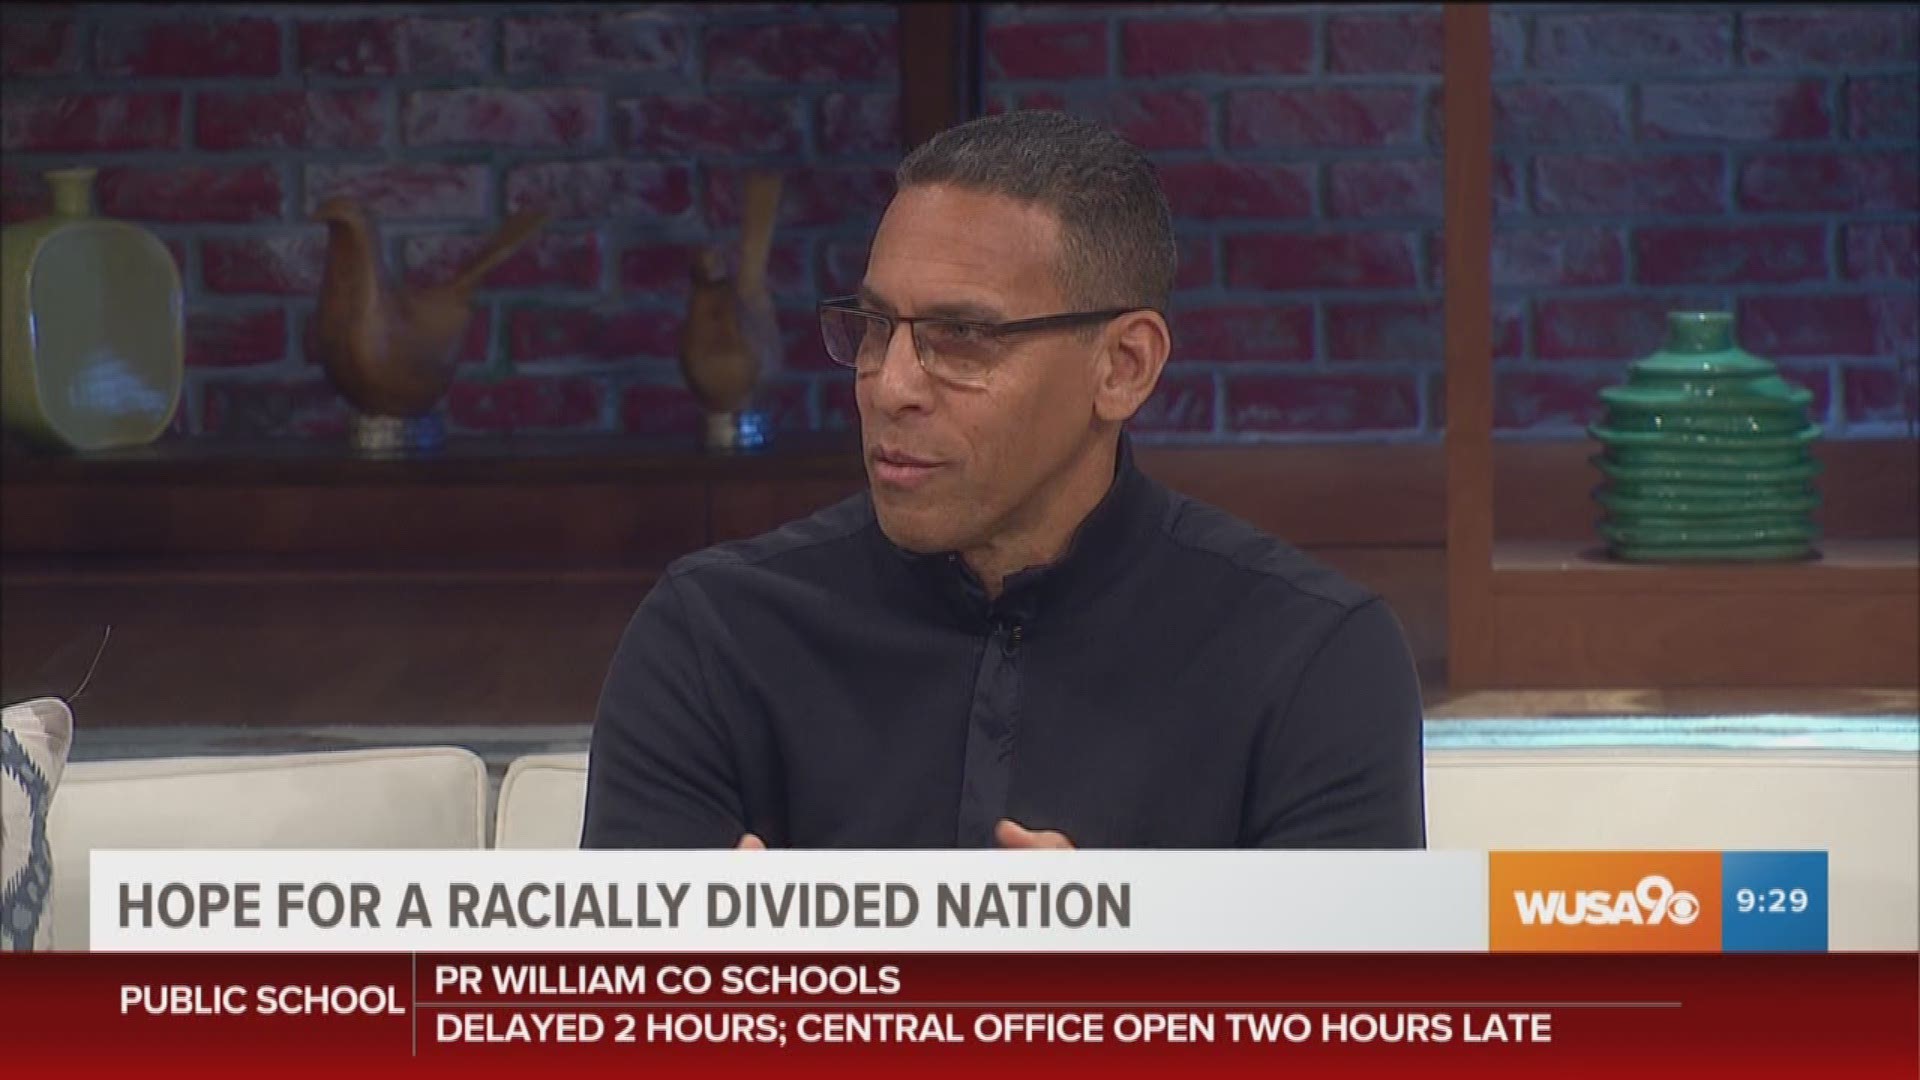 Hear former NFL player turned Pastor, Miles Mcpherson, discuss his new book entitled "The Third Option: Hope for a Racially Divided Nation" which aims to address the current racial climate in the US.